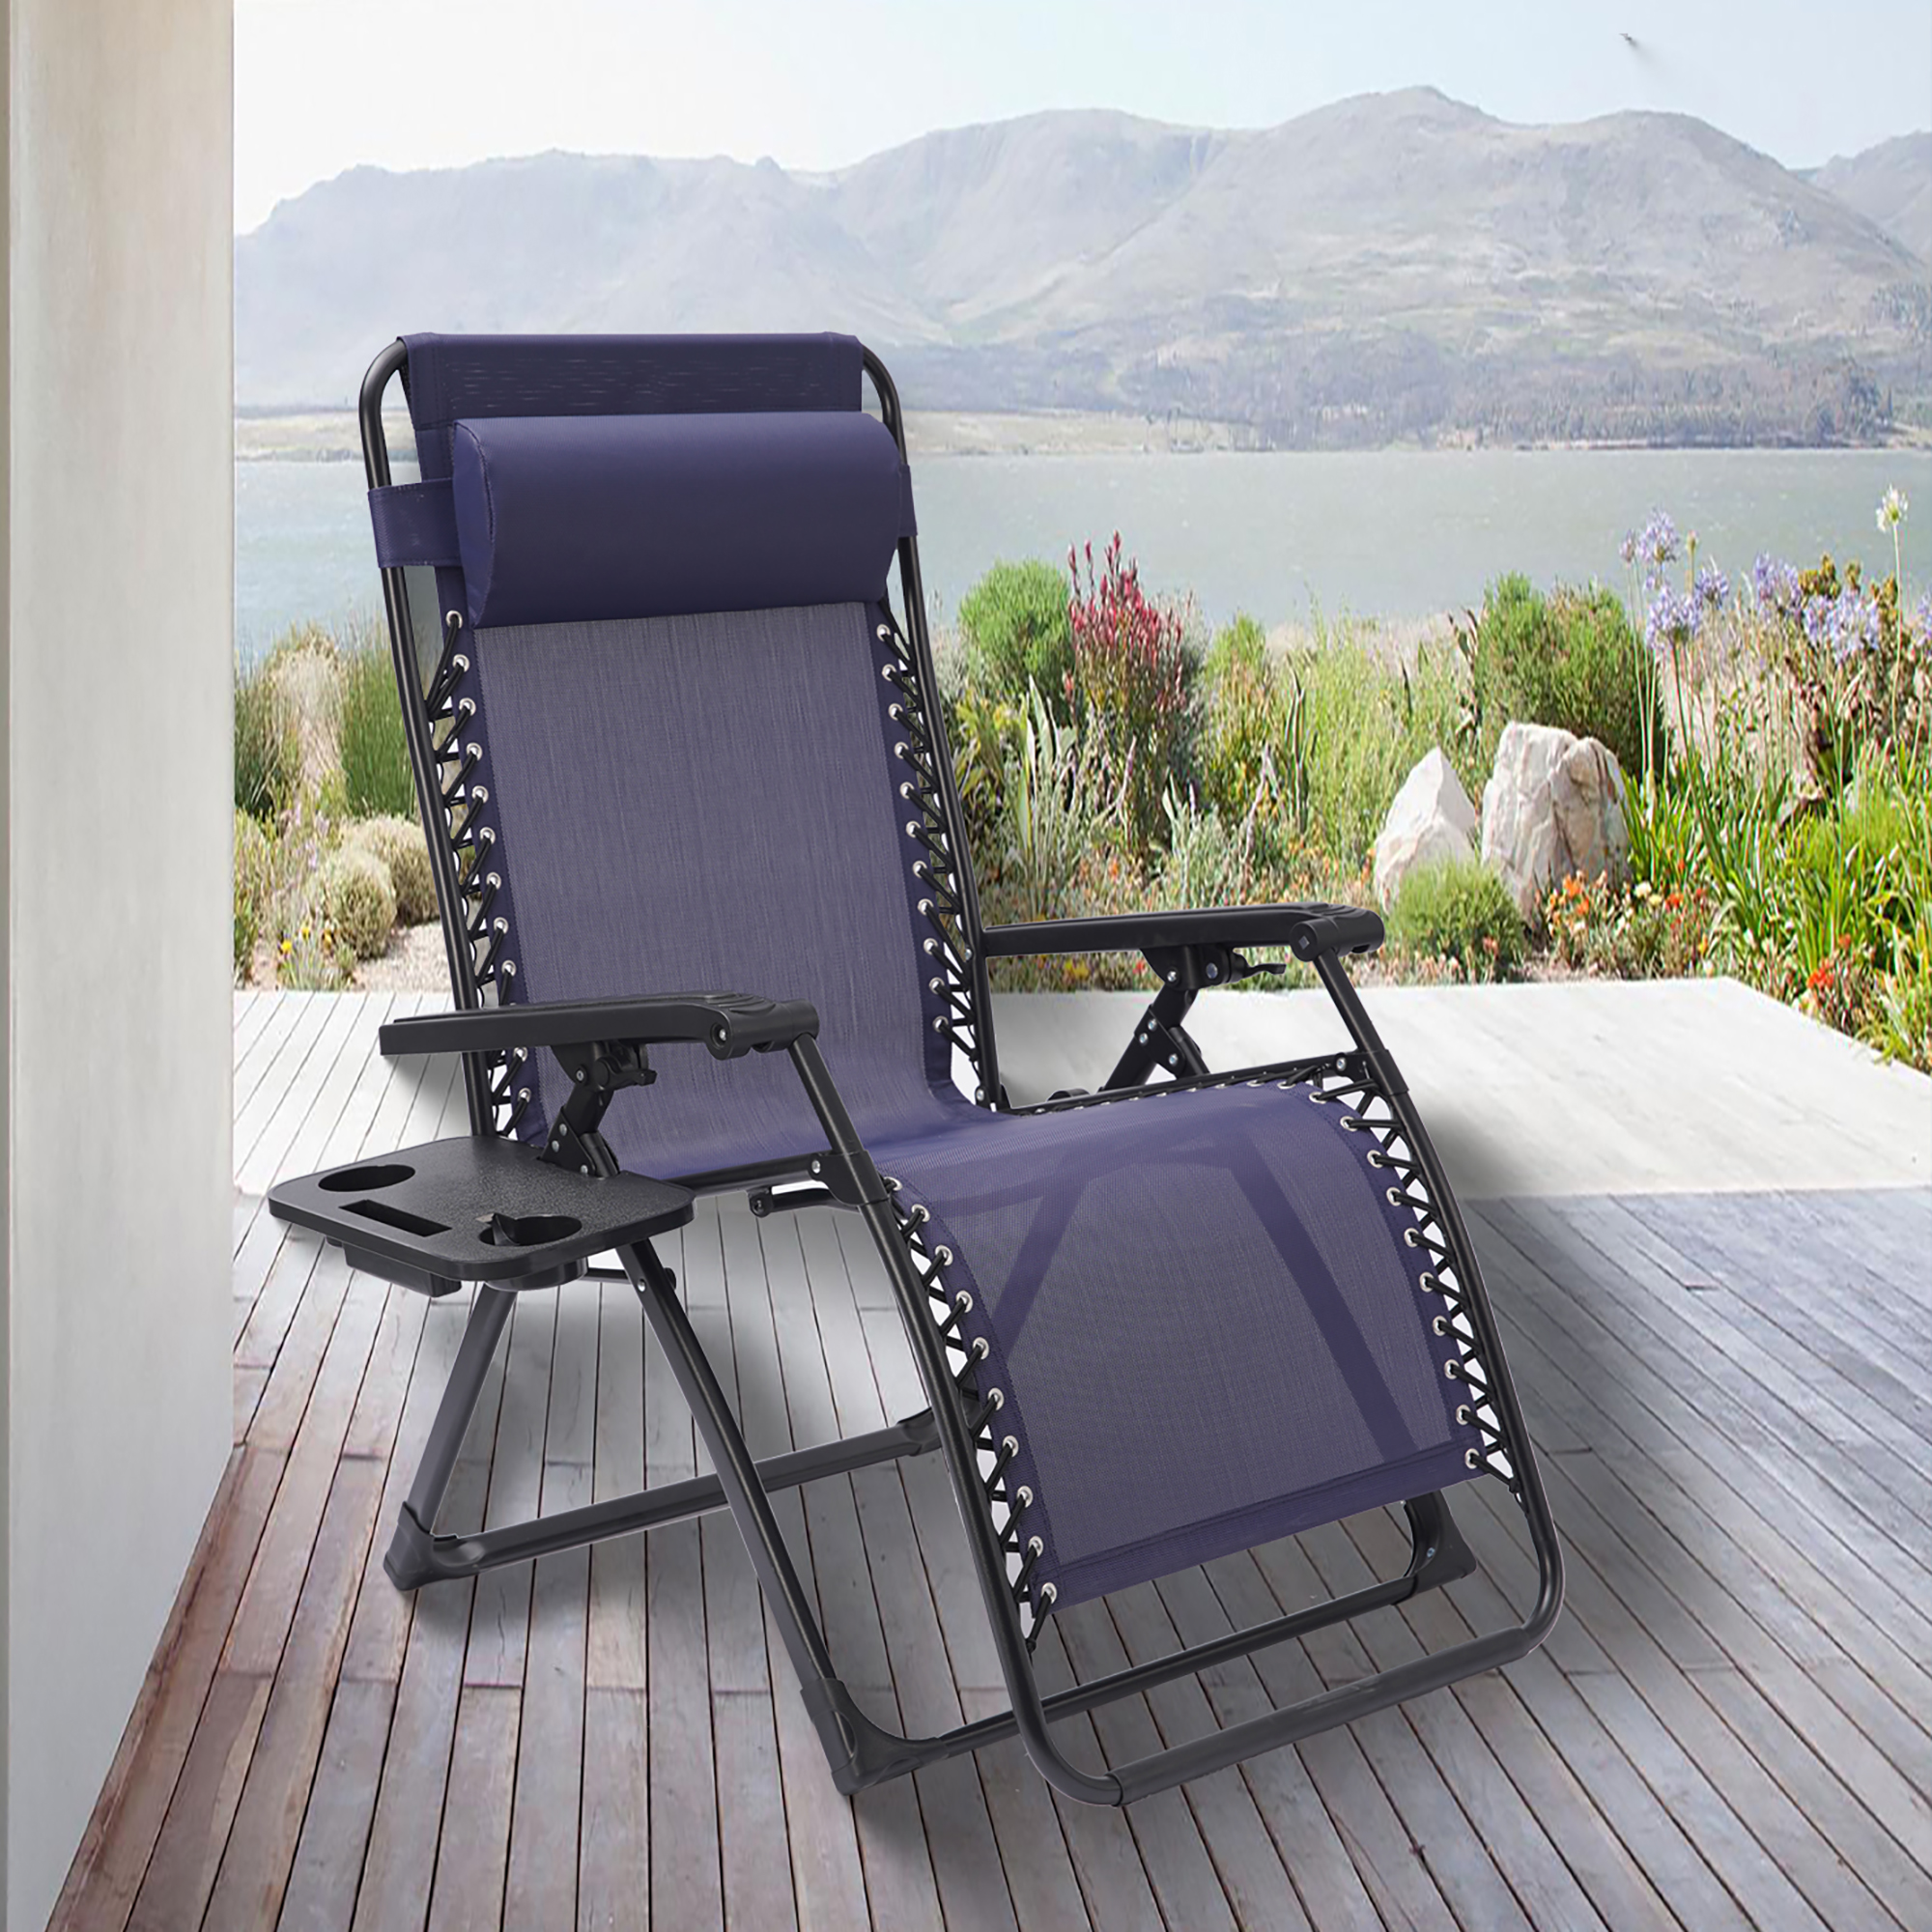 Adjustable Zero Gravity Lounge Chair Recliners, Single Zero Gravity Lounge Folding Chair with Cup Holder and Backrest Pillow fo Yard Porch, Black - image 1 of 8